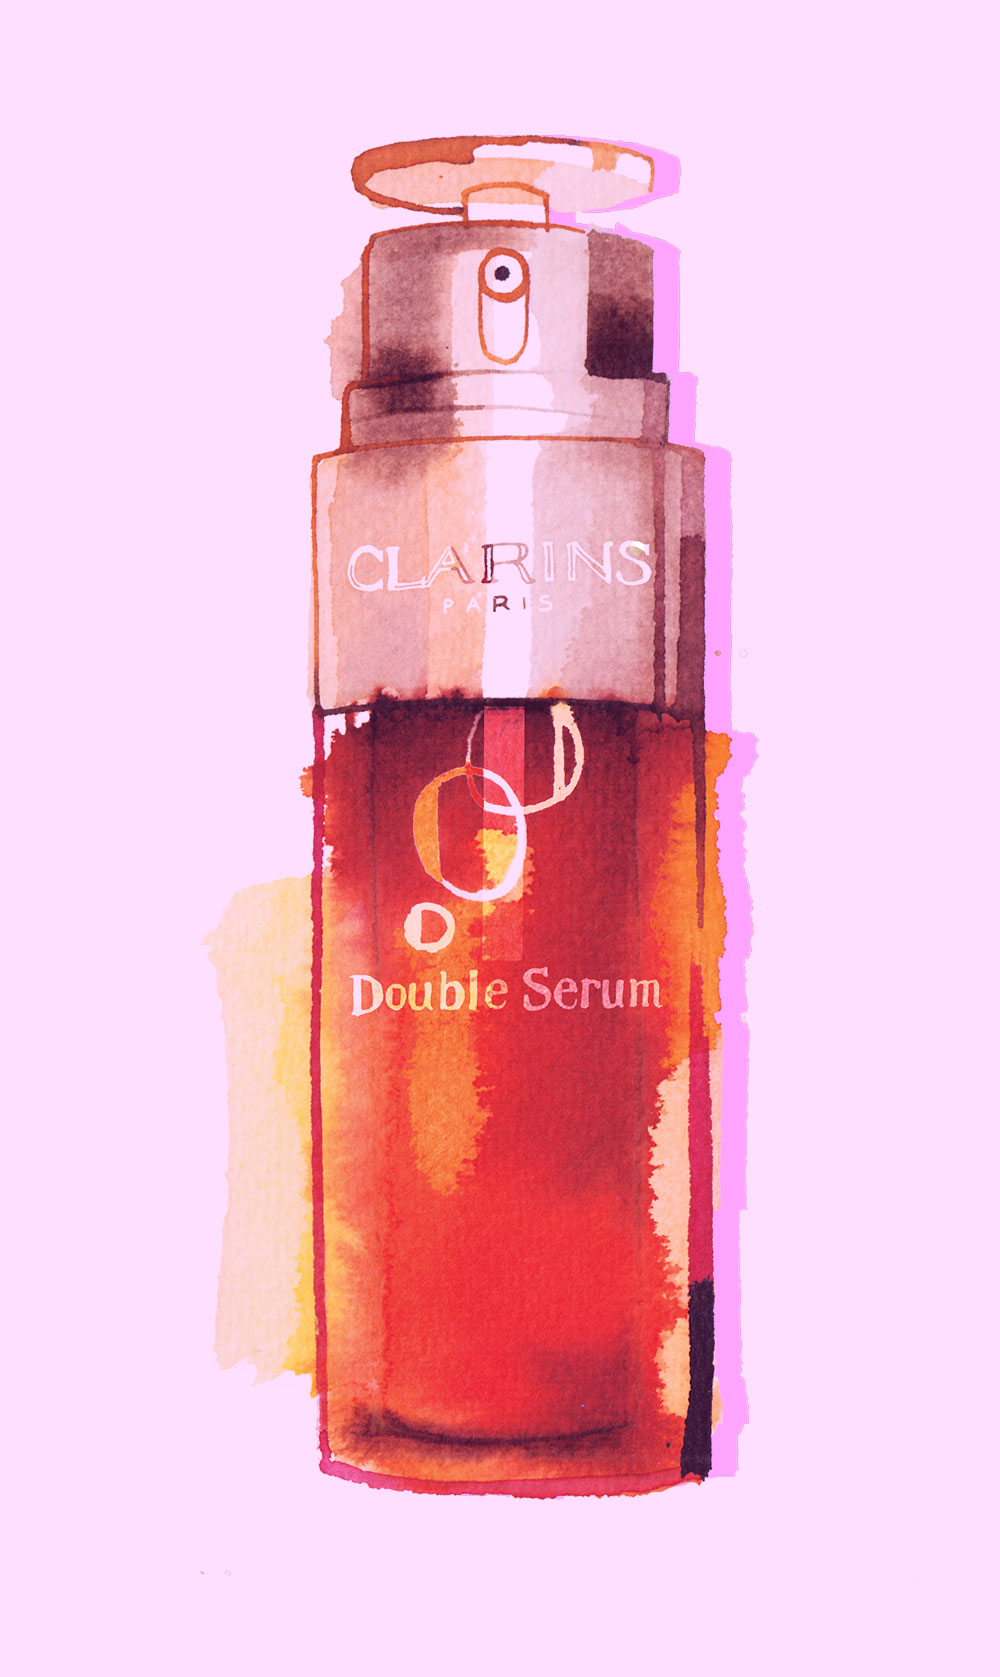 Watercolor Illustration of Clarins Double Serum - Madame Figaro, 2018